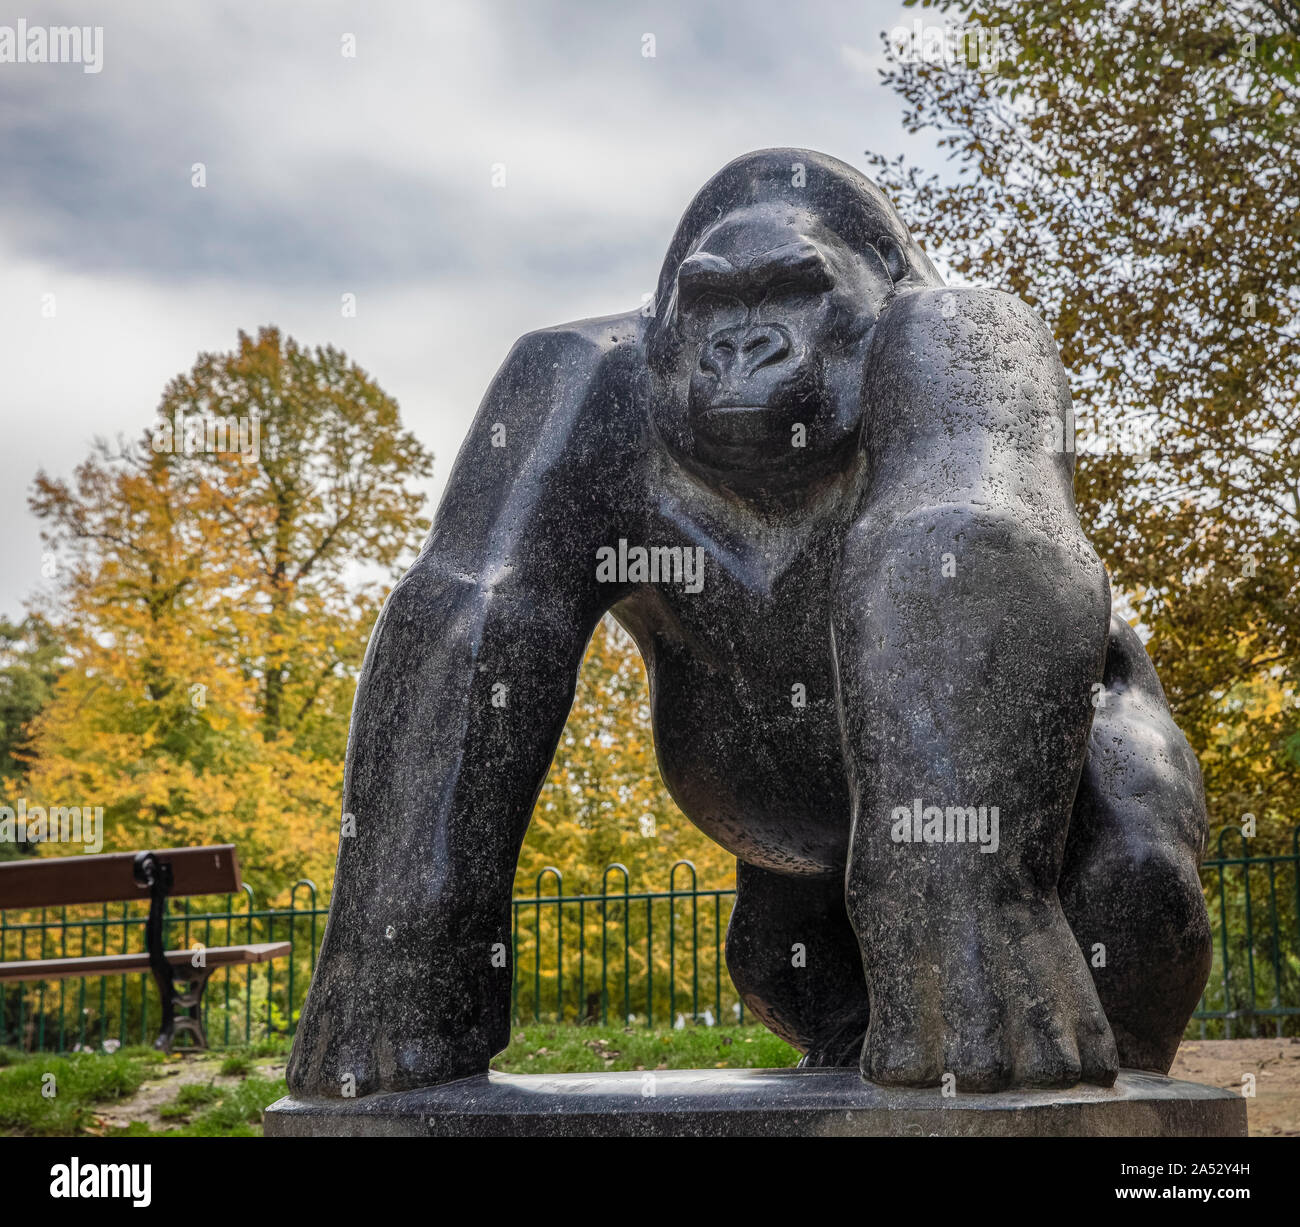 Statue of a gorilla at Crystal Palace Park in South London with trees ...